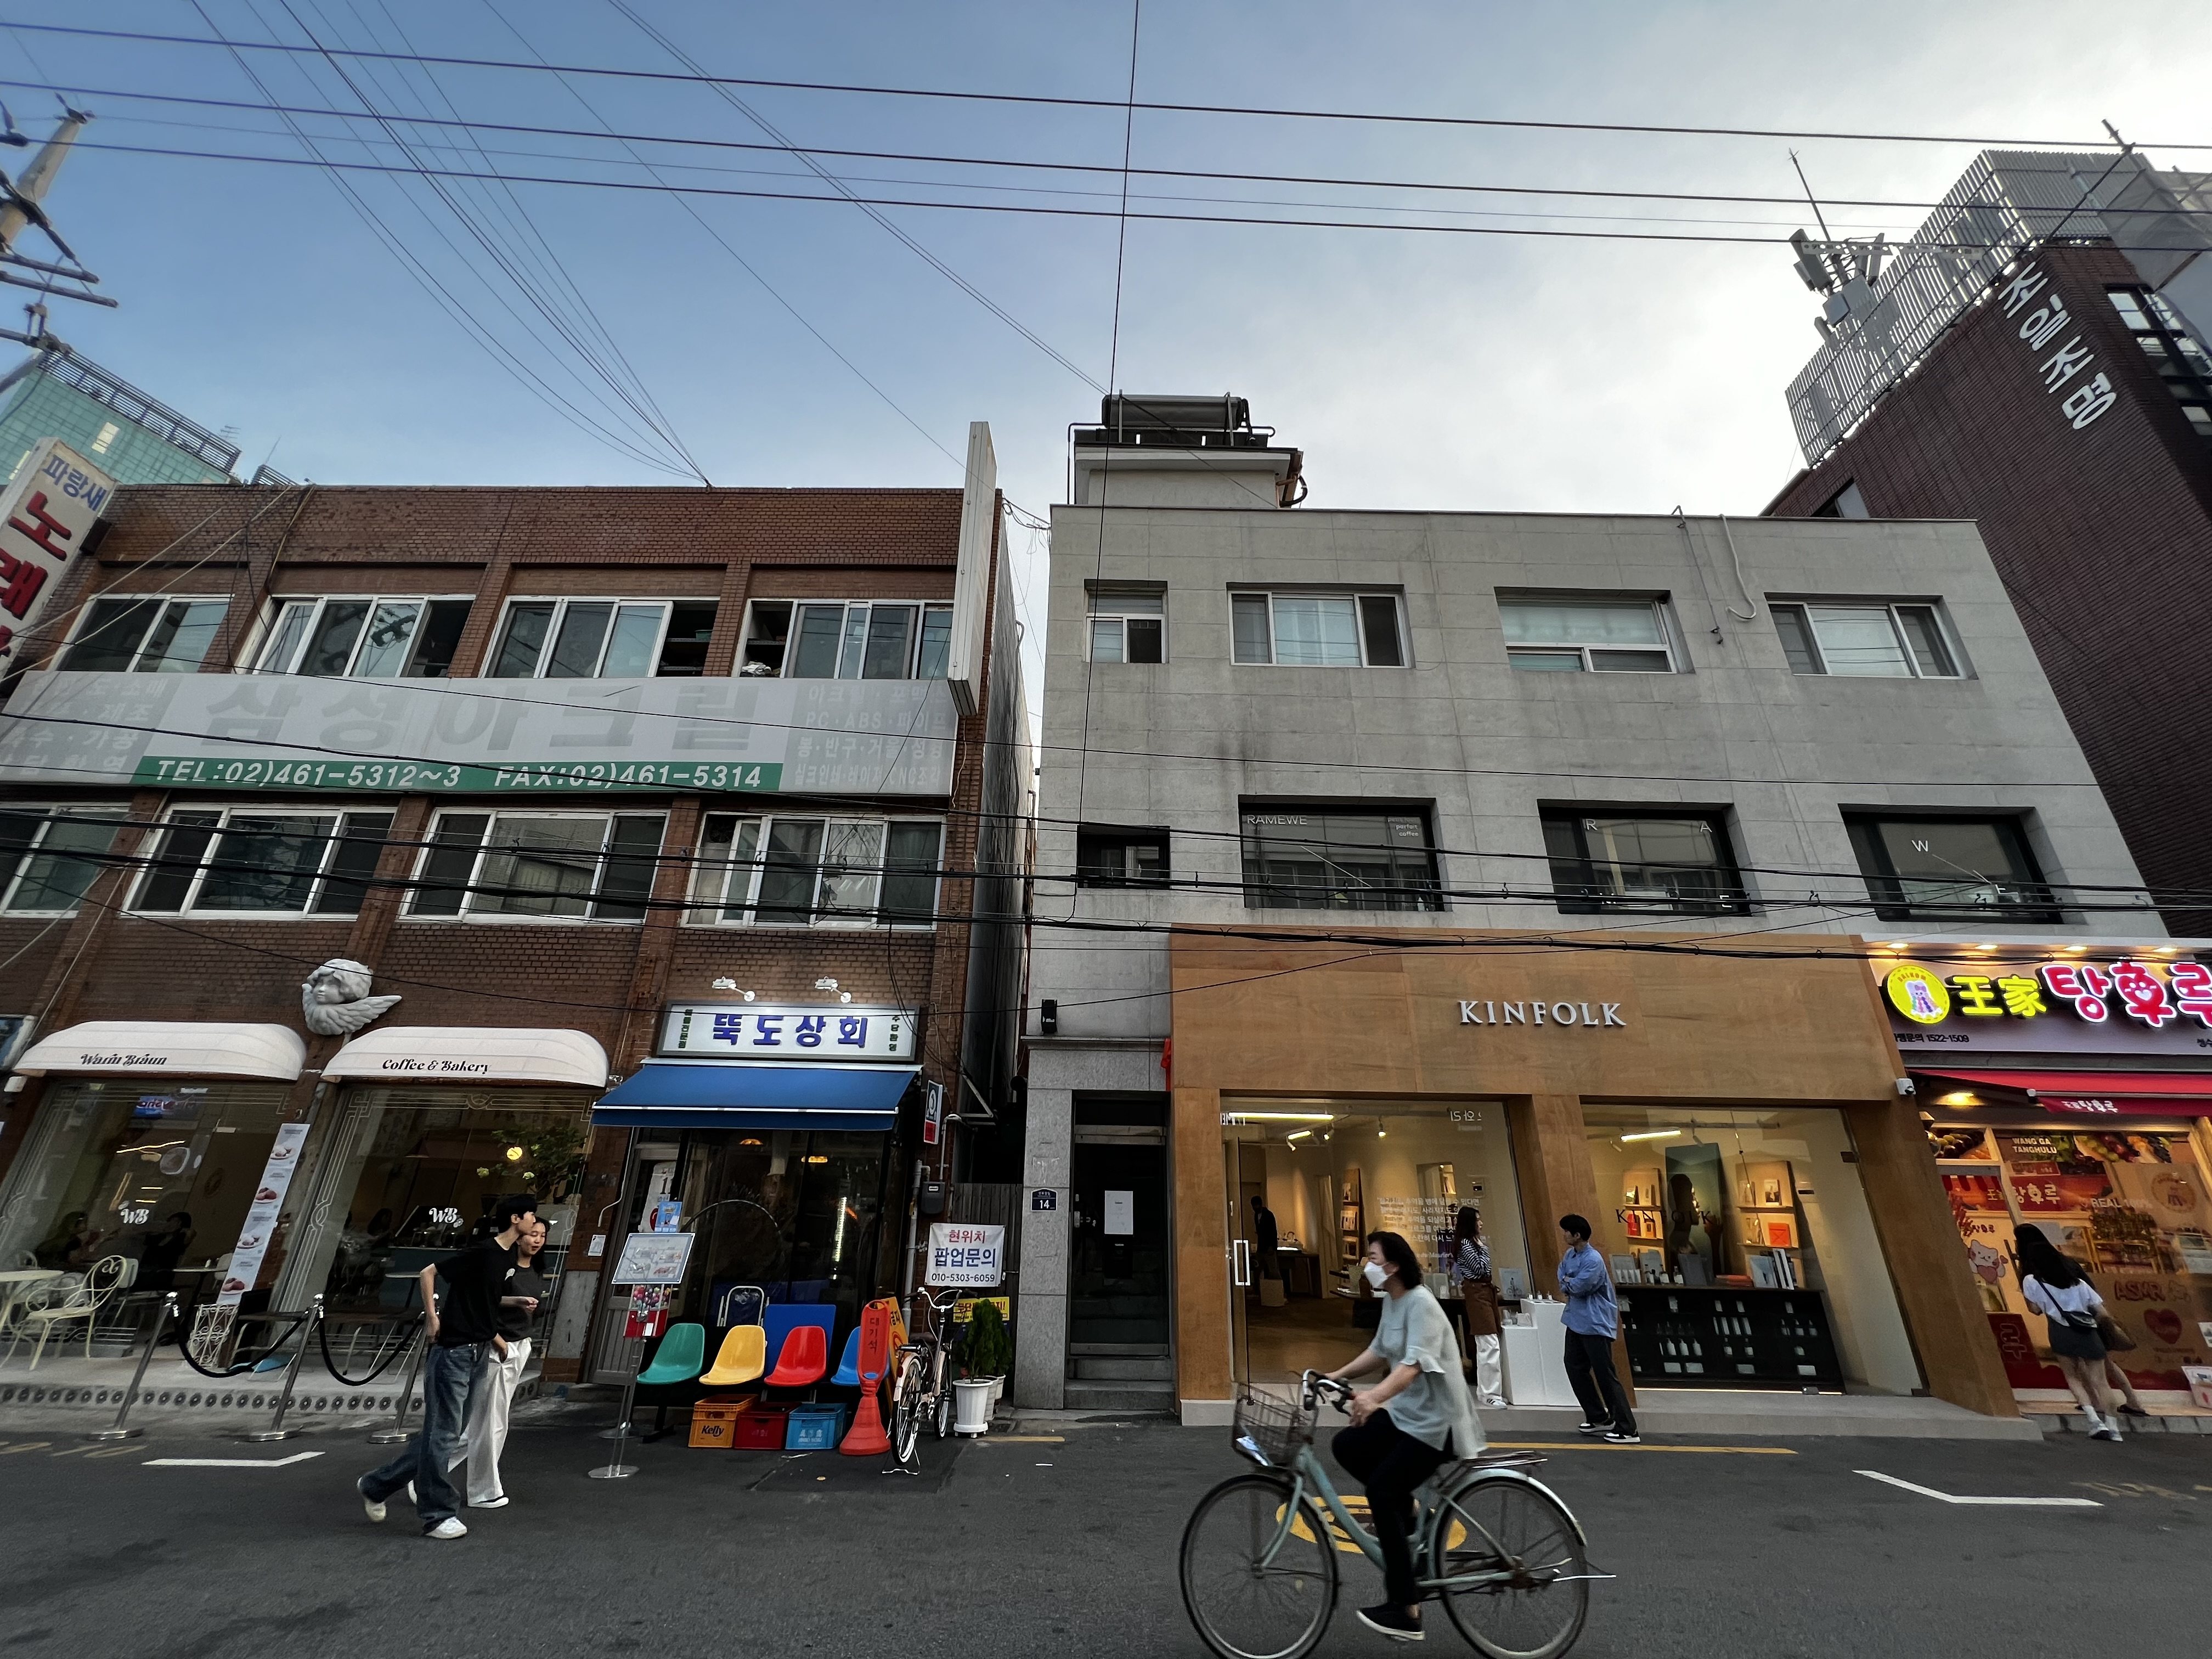 When Kinfolk opened a pop-up store in Seongsu-dong, Seoul, from which to sell its delicate cosmetics, it was flanked by older businesses traditional to the area. Photo: Erika Na